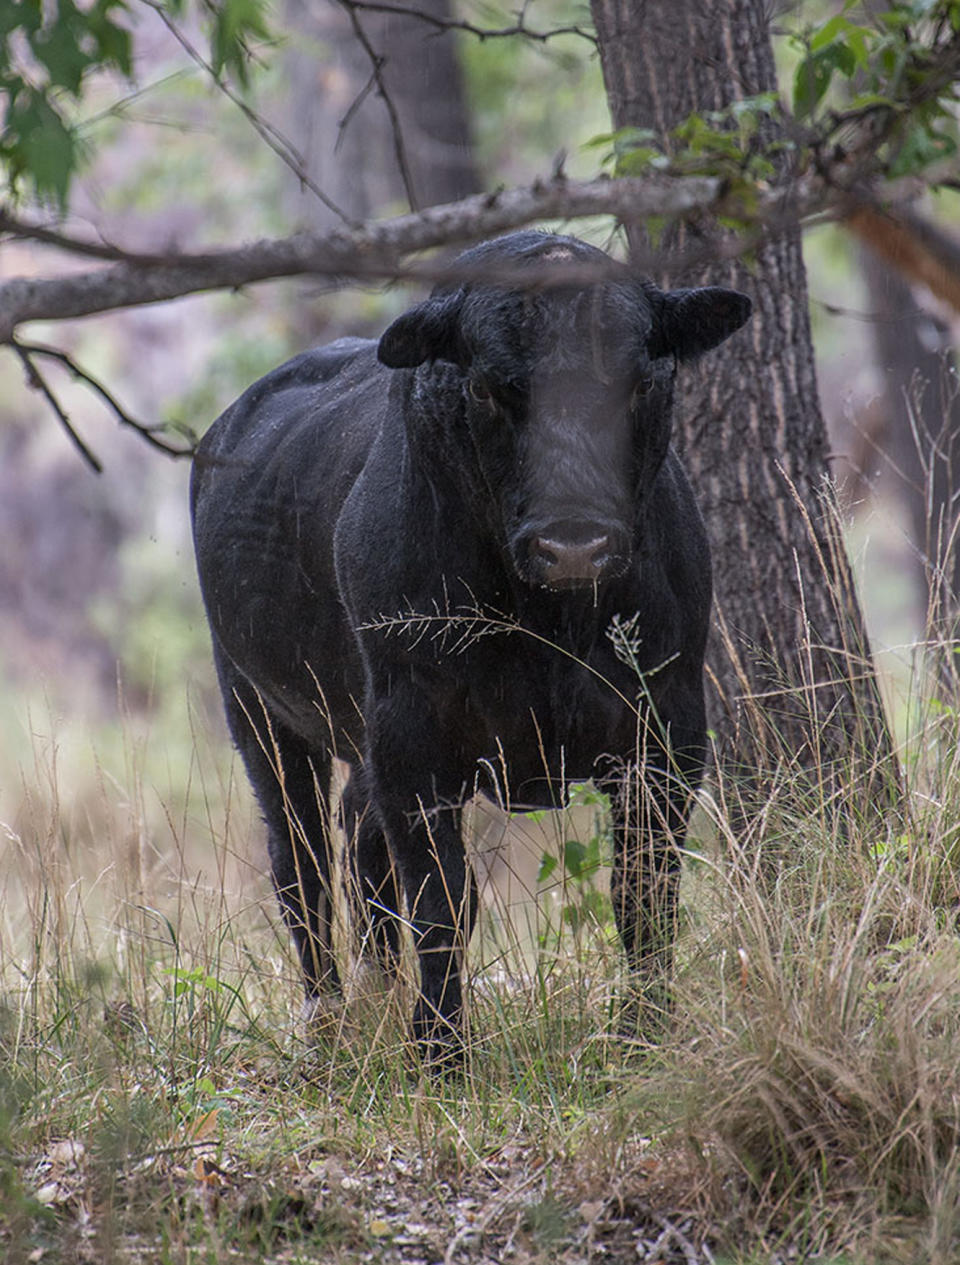 In this photo provided by Robin Silver, a feral bull is seen along the Gila River in the Gila Wilderness in southwestern New Mexico, on July 25, 2020. U.S. forest managers in New Mexico are moving ahead with plans to kill feral cattle that they say have become a threat to public safety and natural resources in the nation's first designated wilderness, setting the stage for more legal challenges over how to handle wayward livestock as drought maintains its grip on the West. (©Robin Silver/Center for Biological Diversity via AP)